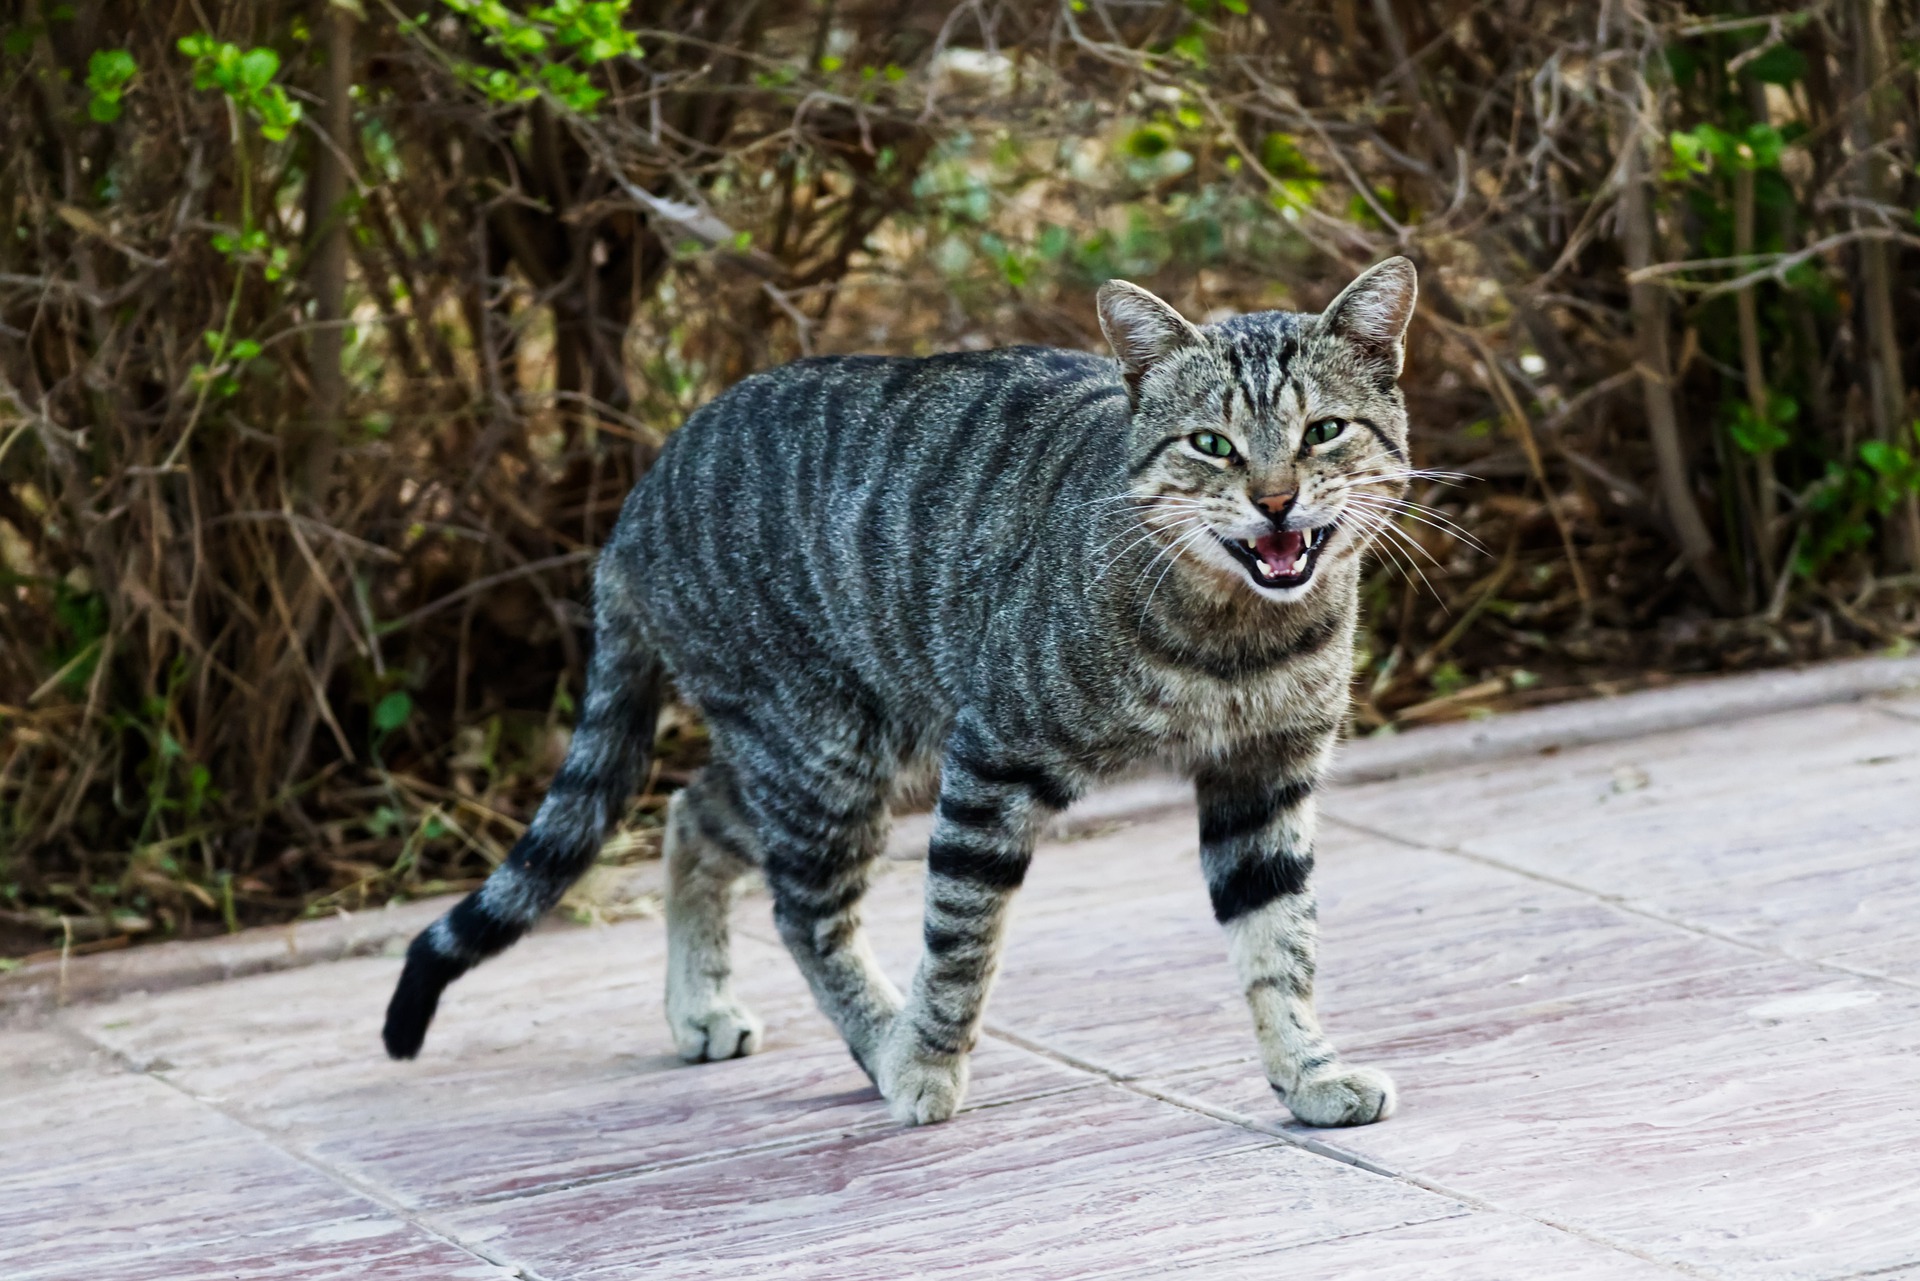 Tiger cat meowing while walking across a patio